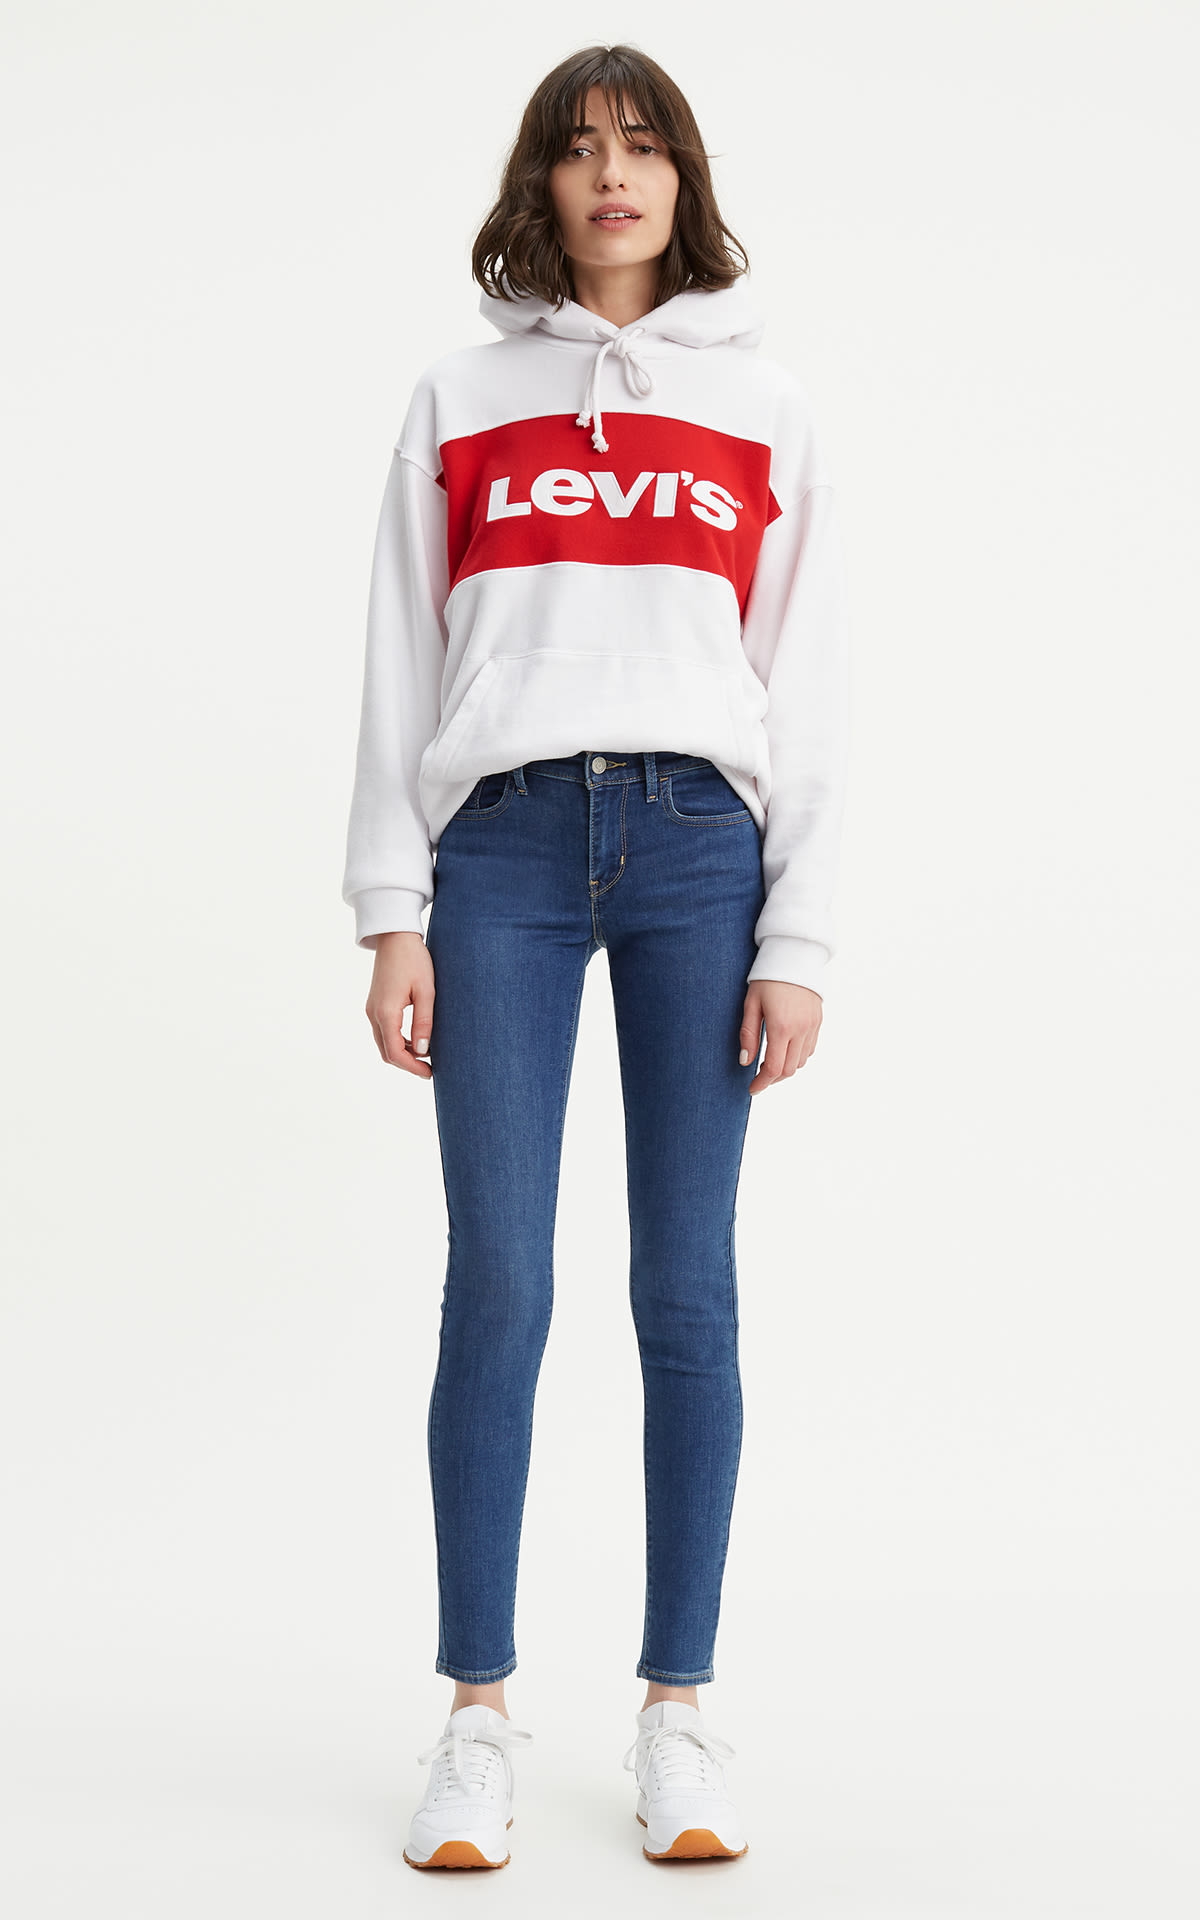 Levi's® | How to pick your perfect pair of jeans | Maasmechelen Village